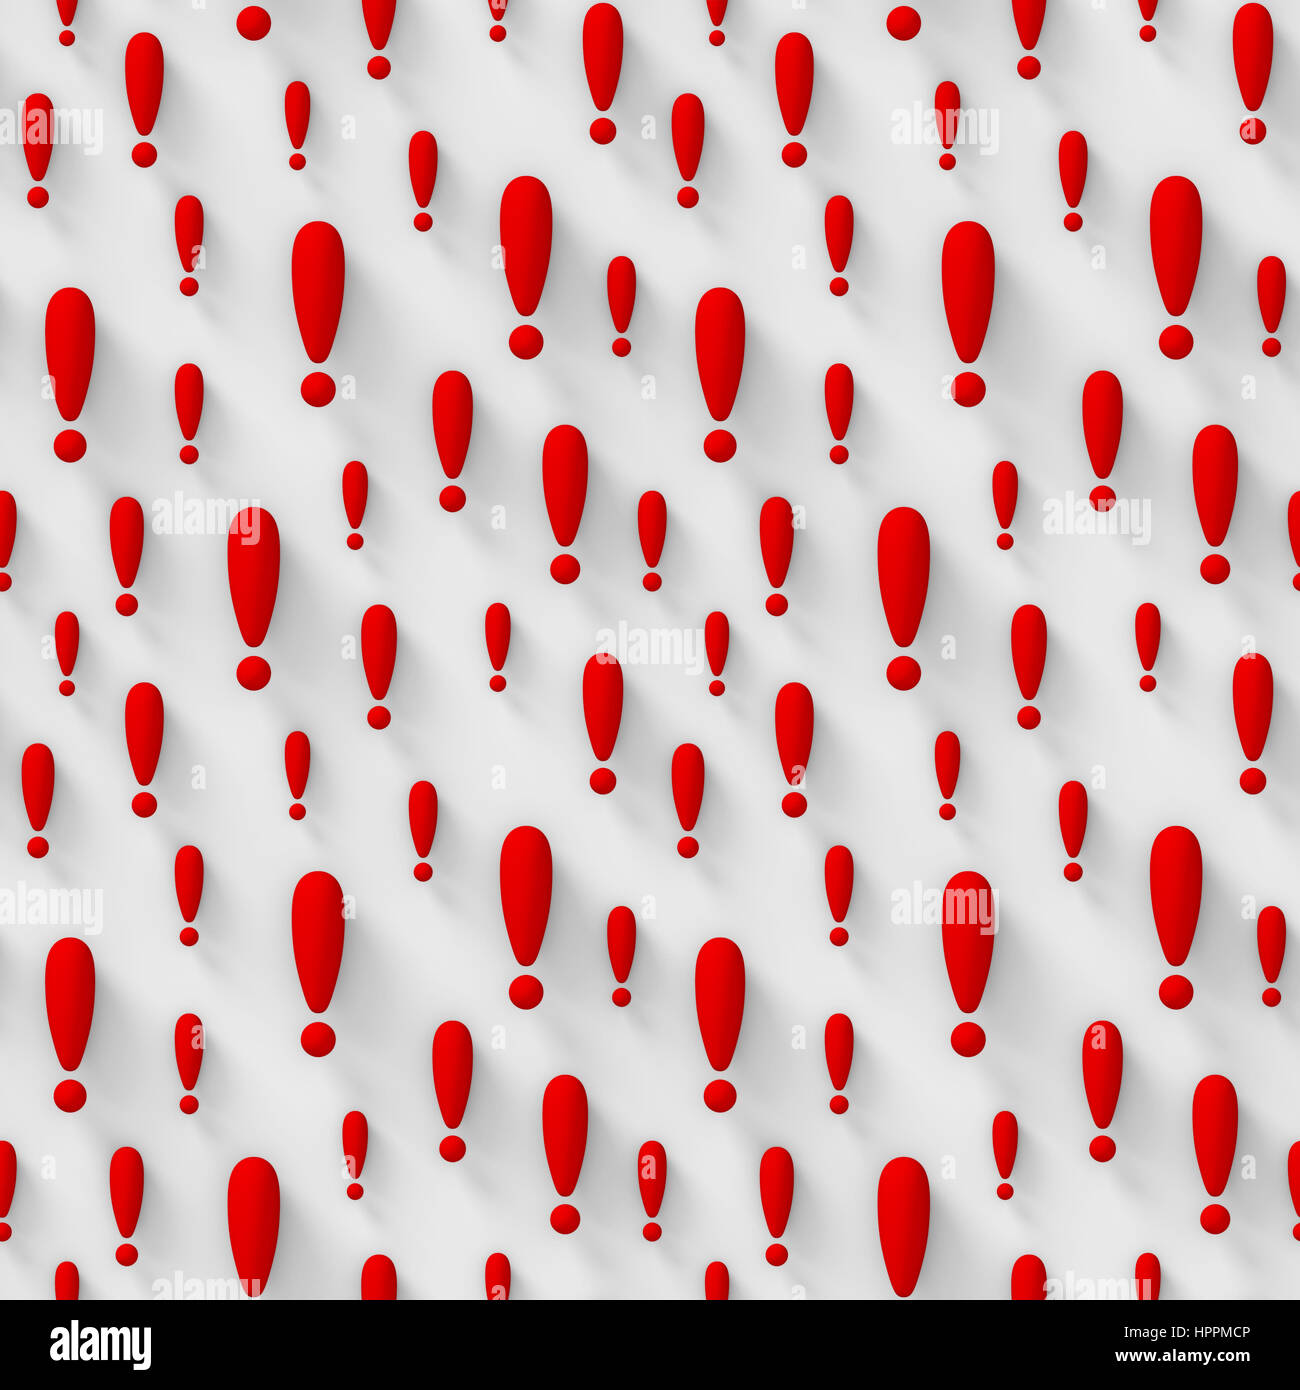 seamless 3d background with red exclamation mark Stock Photo